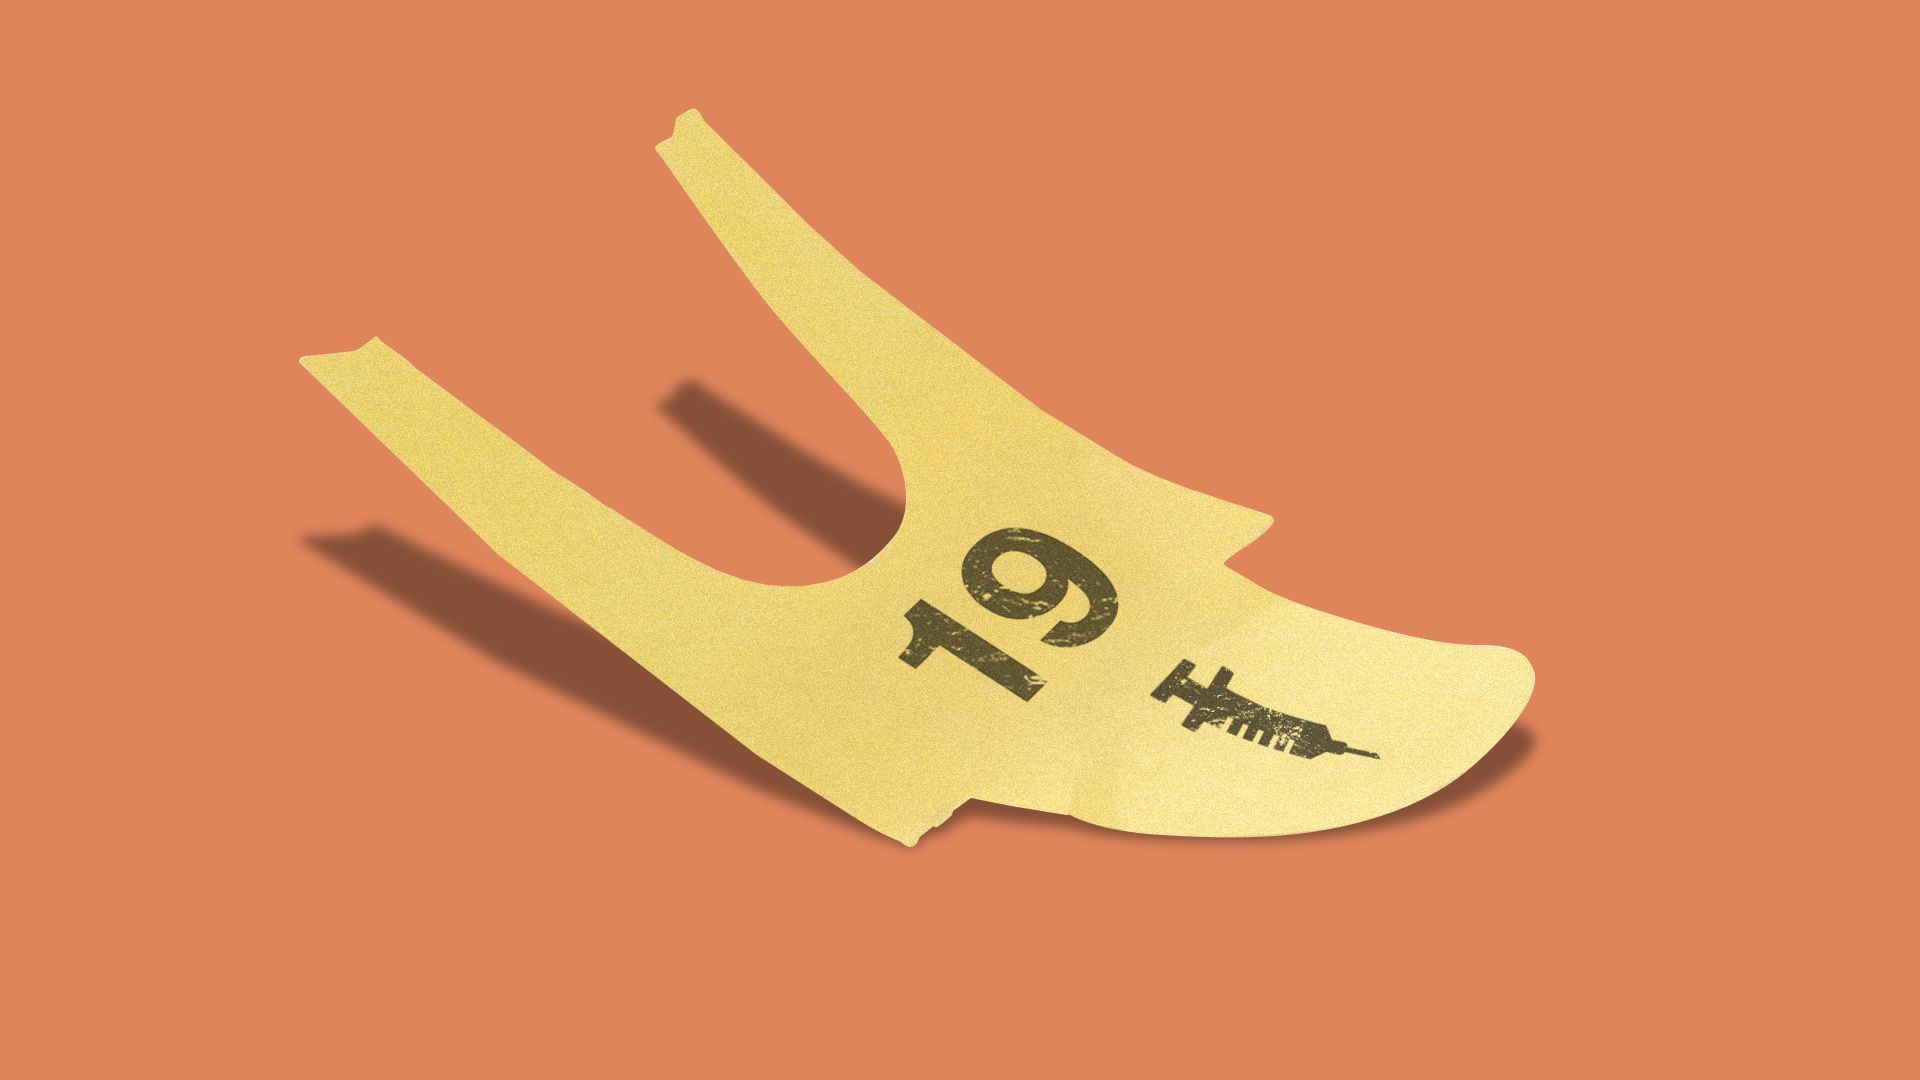 Illustration of a waiting ticket with the number 19 on it and a symbol of a syringe.  